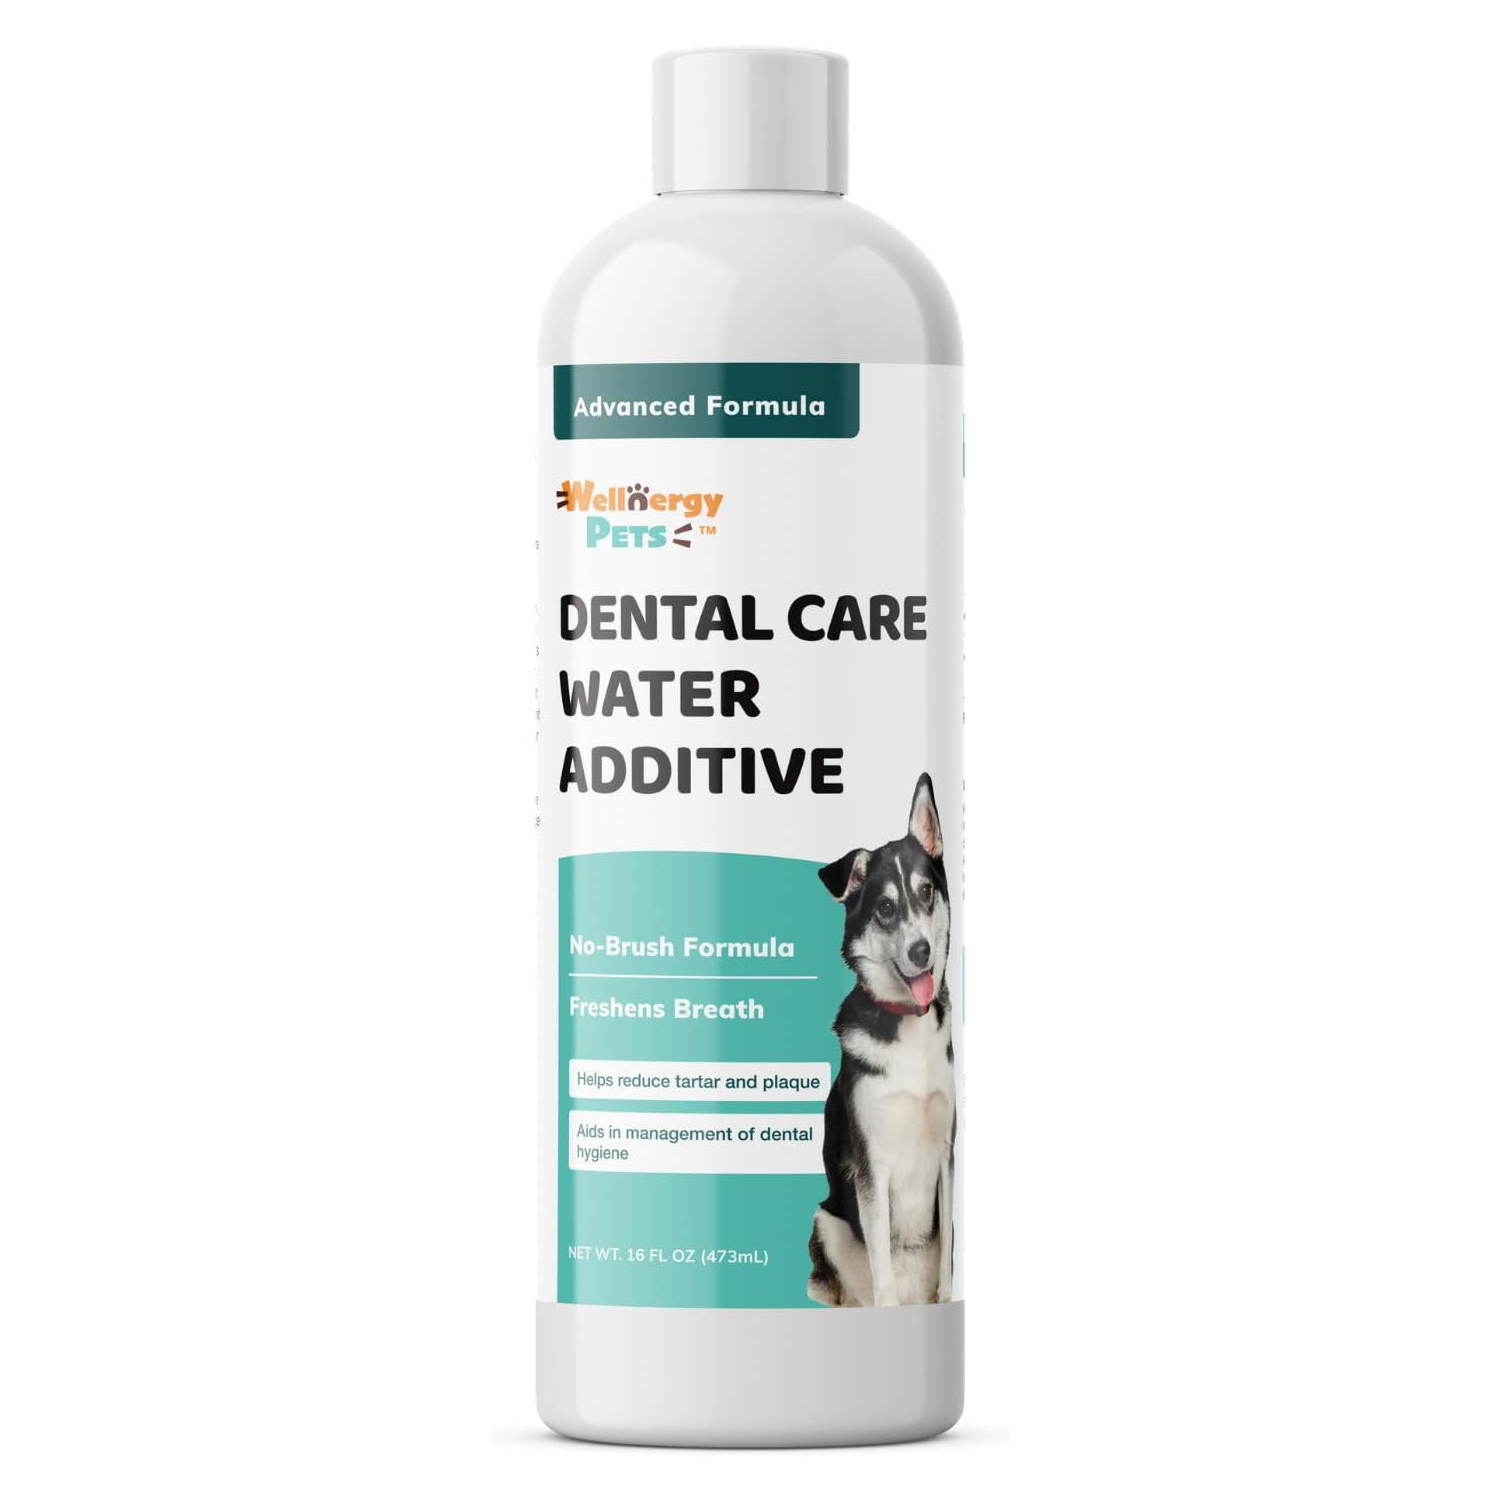 New Project Wellnergy Pets Dental Care Water Additive for Dogs & Cats 